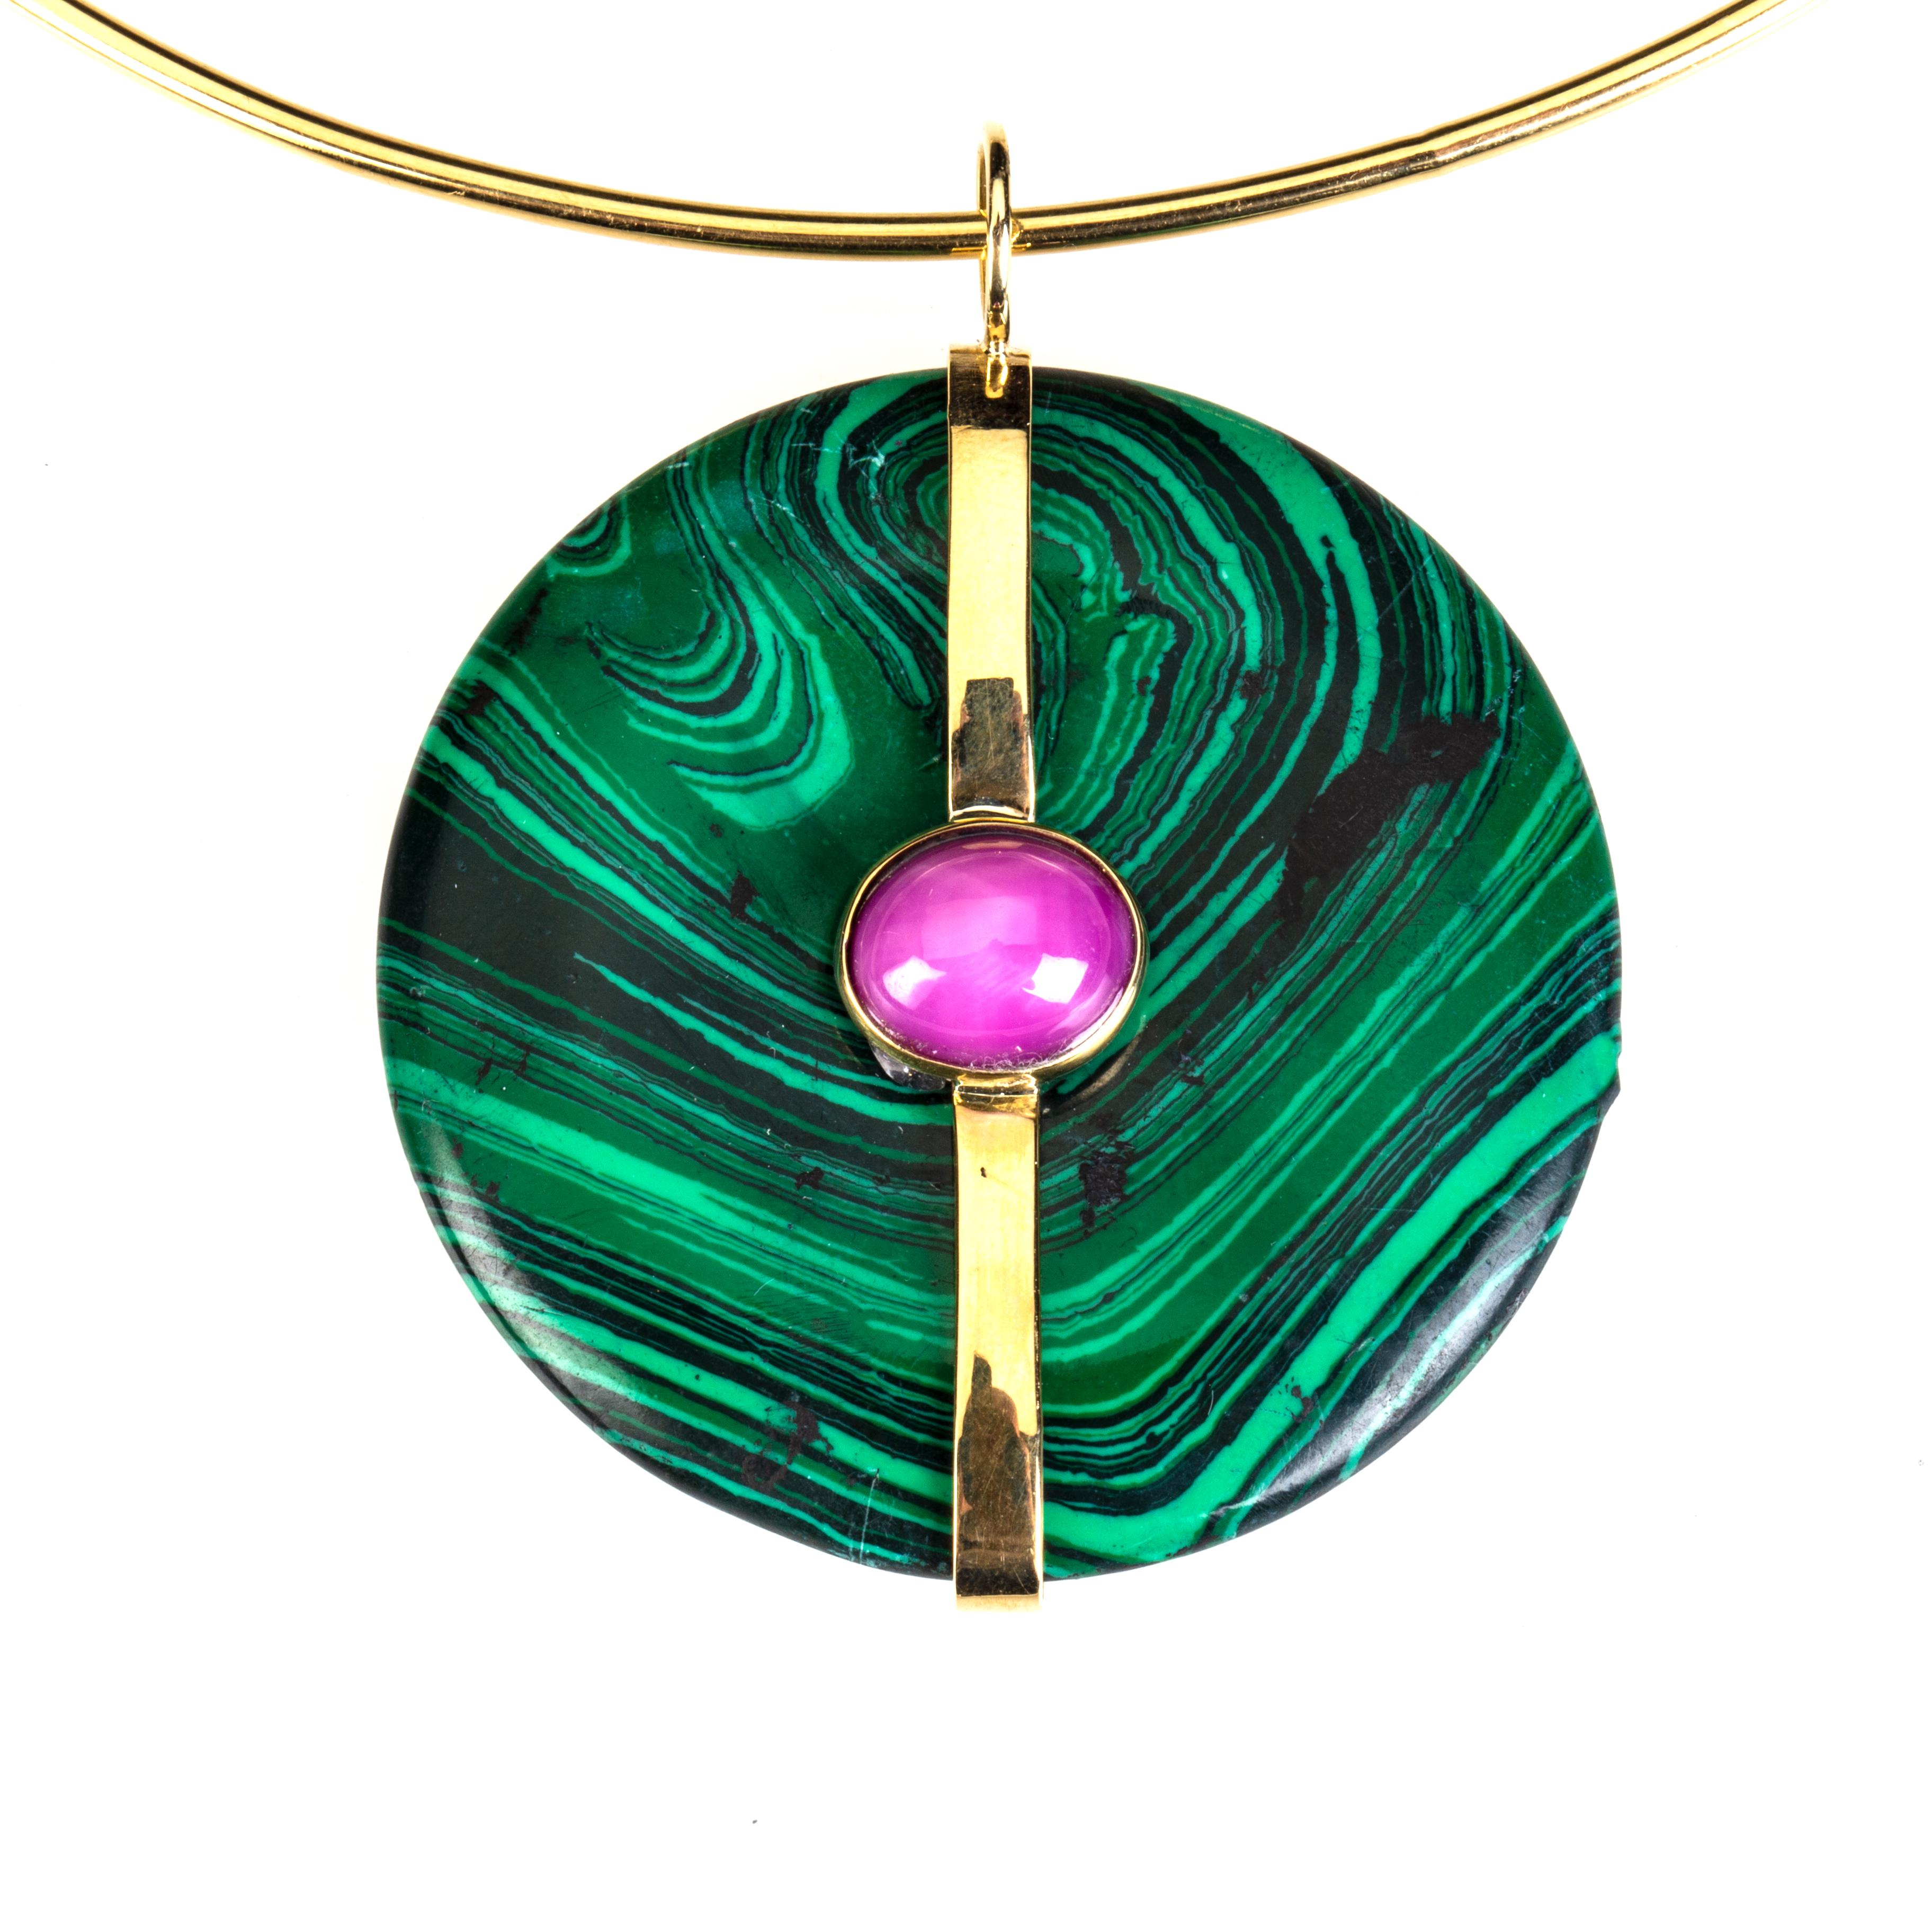 Malachite bi, 18 k gold gr 12, star Ruby pendant, we delivered with a silk string but is available on request also a gold necklace as in the pictures.
All Giulia Colussi jewelry is new and has never been previously owned or worn. Each item will